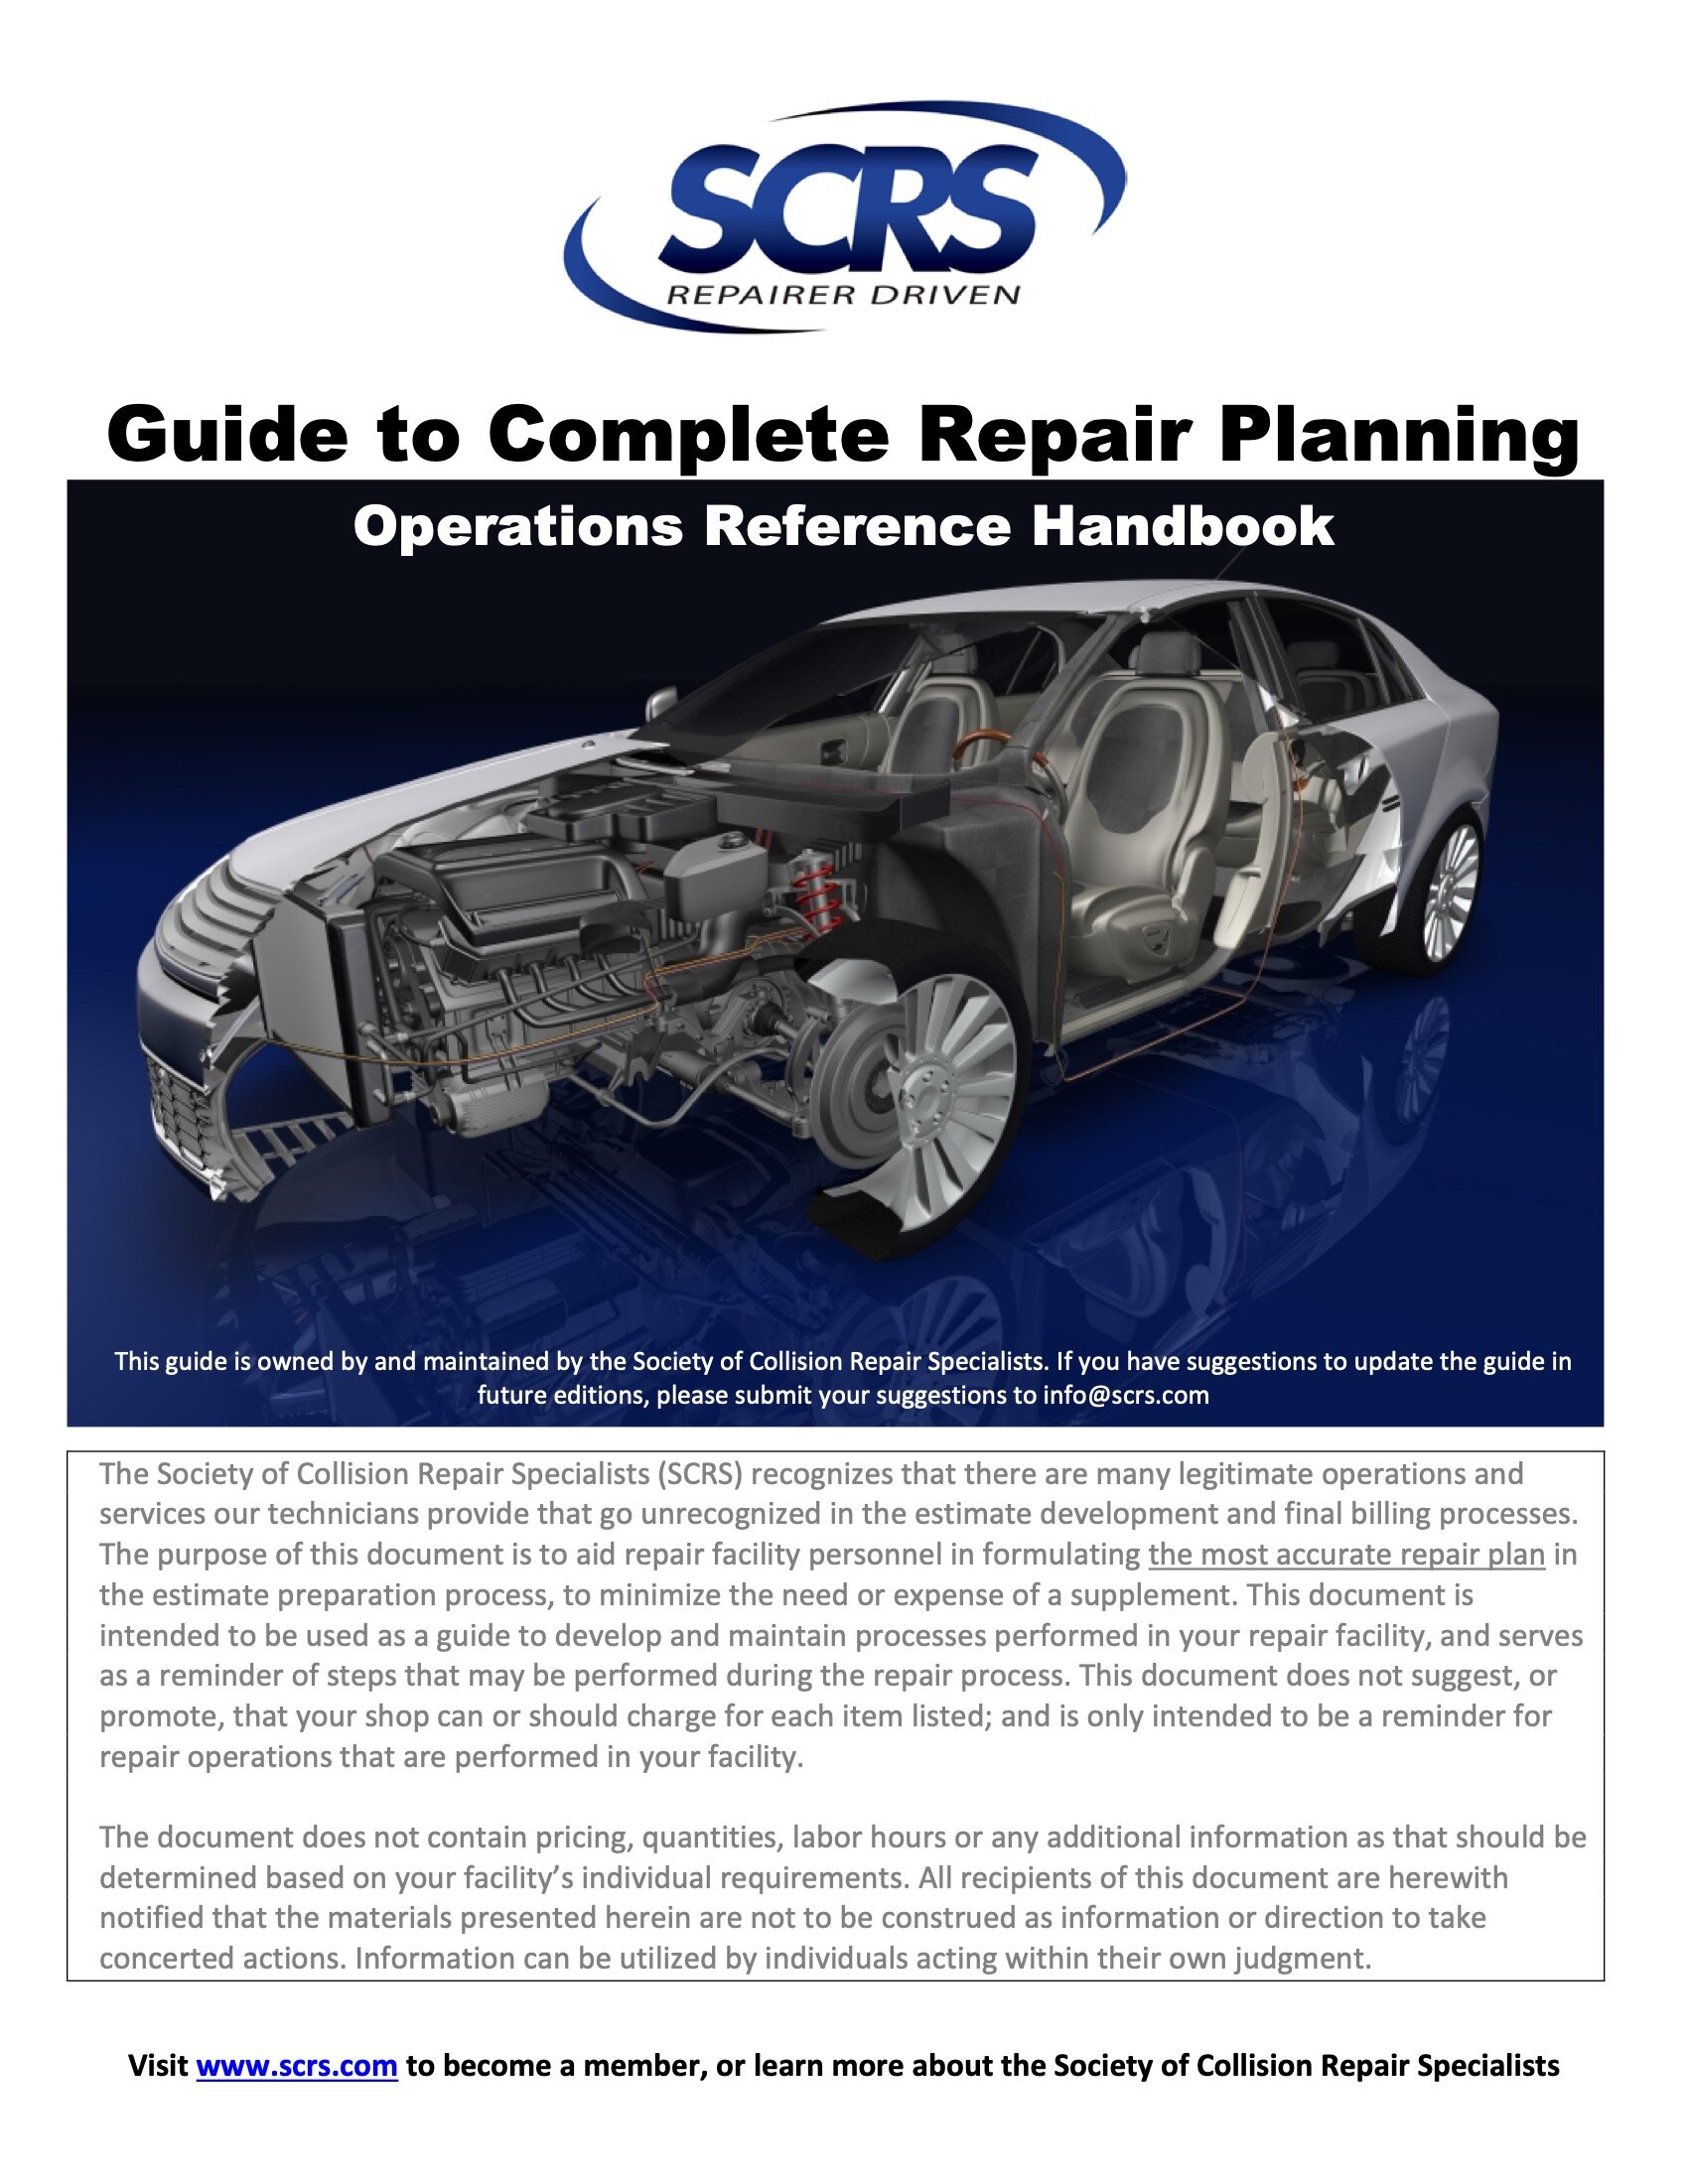 2016-scrs-guide-to-complete-repair-planning-revised-11-16 1.jpeg